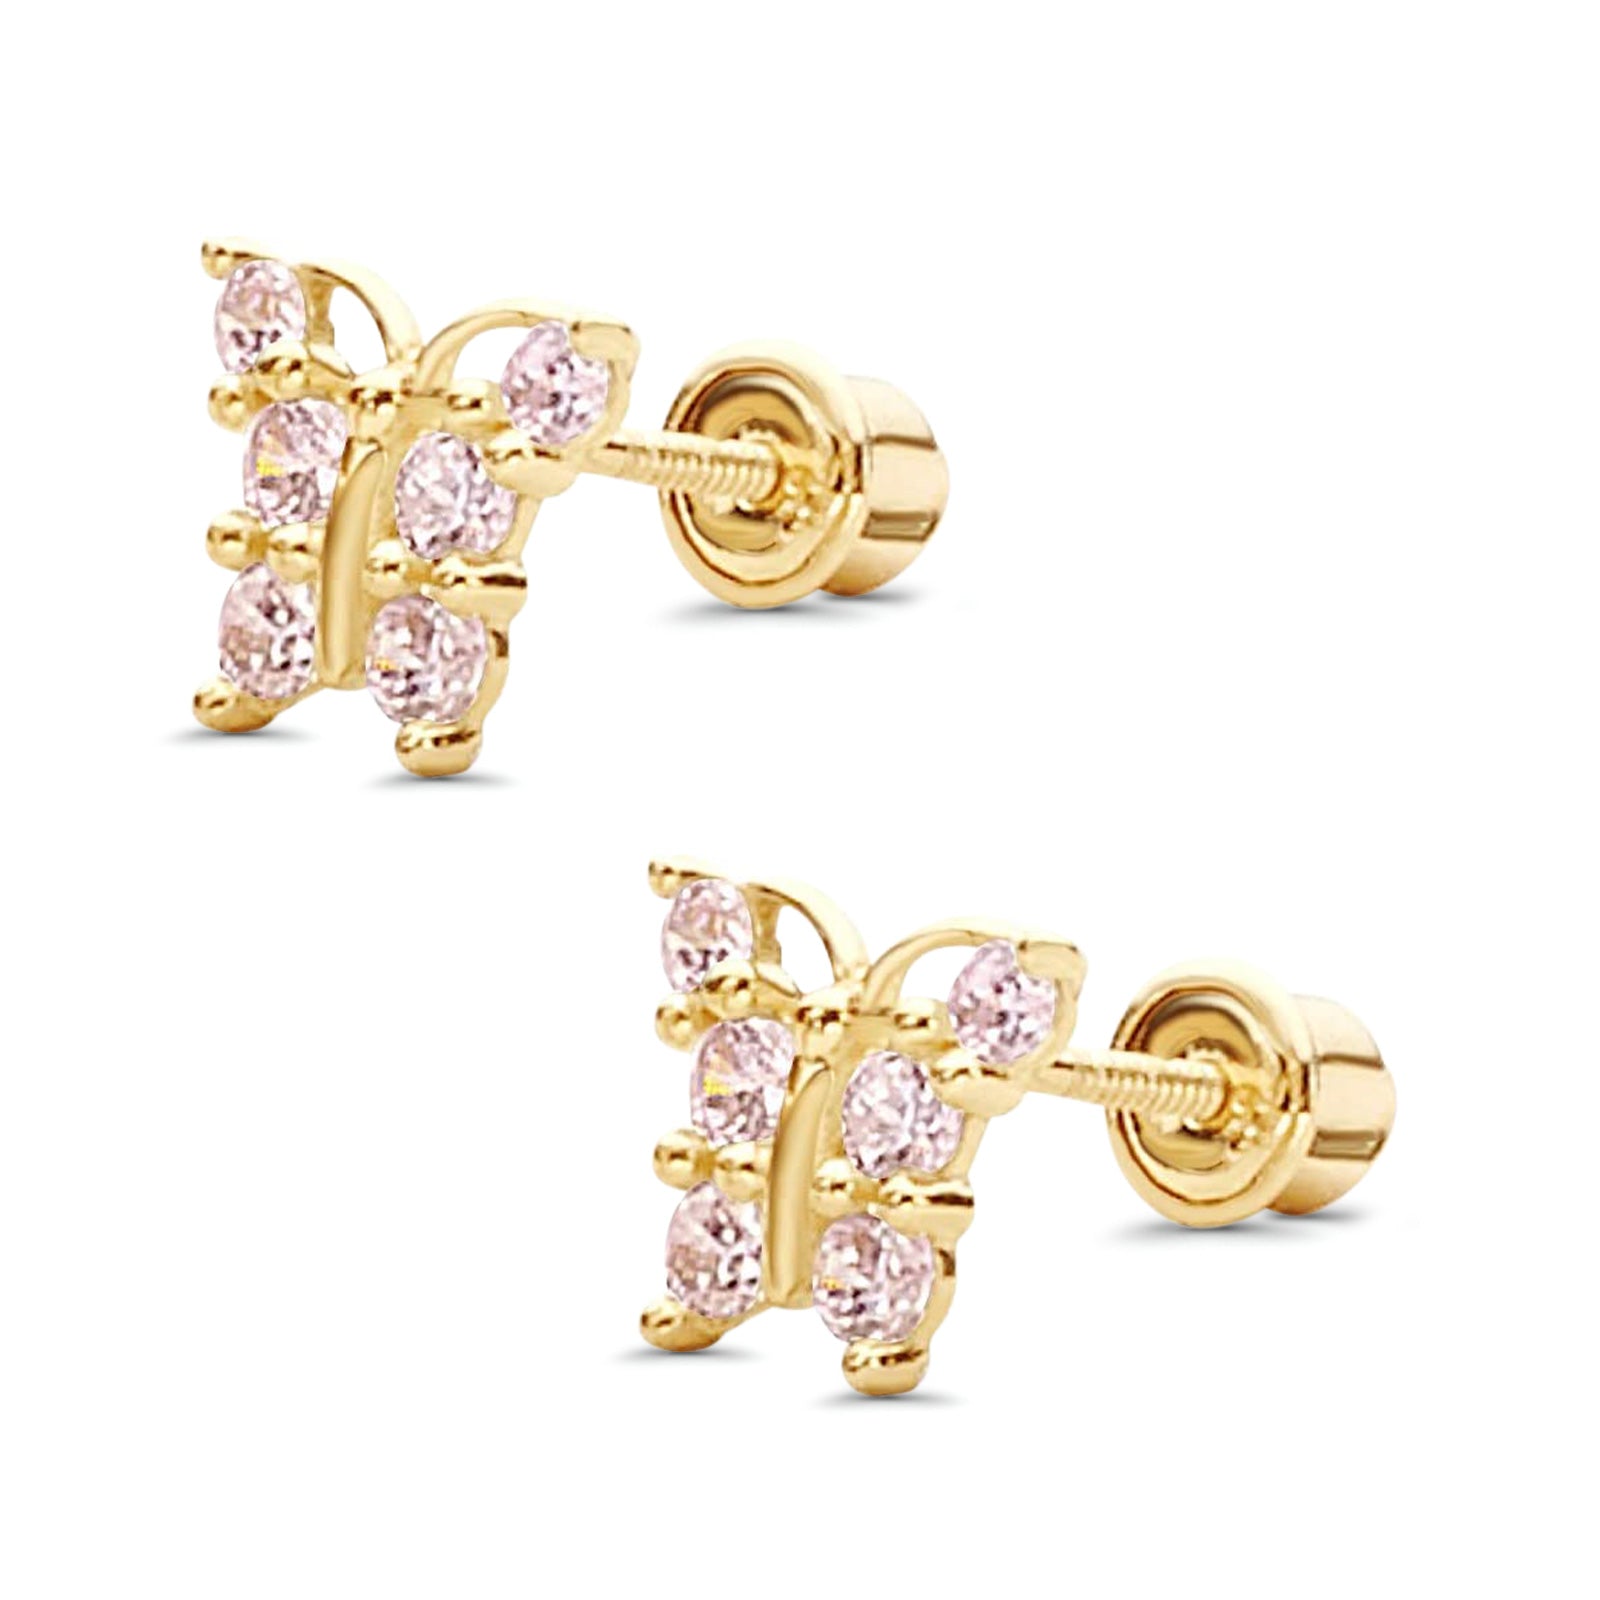 14K Yellow Gold Butterfly Stud Earrings with Screw Back - 2 Different Size Available, Best Anniversary Birthday Gift for Her